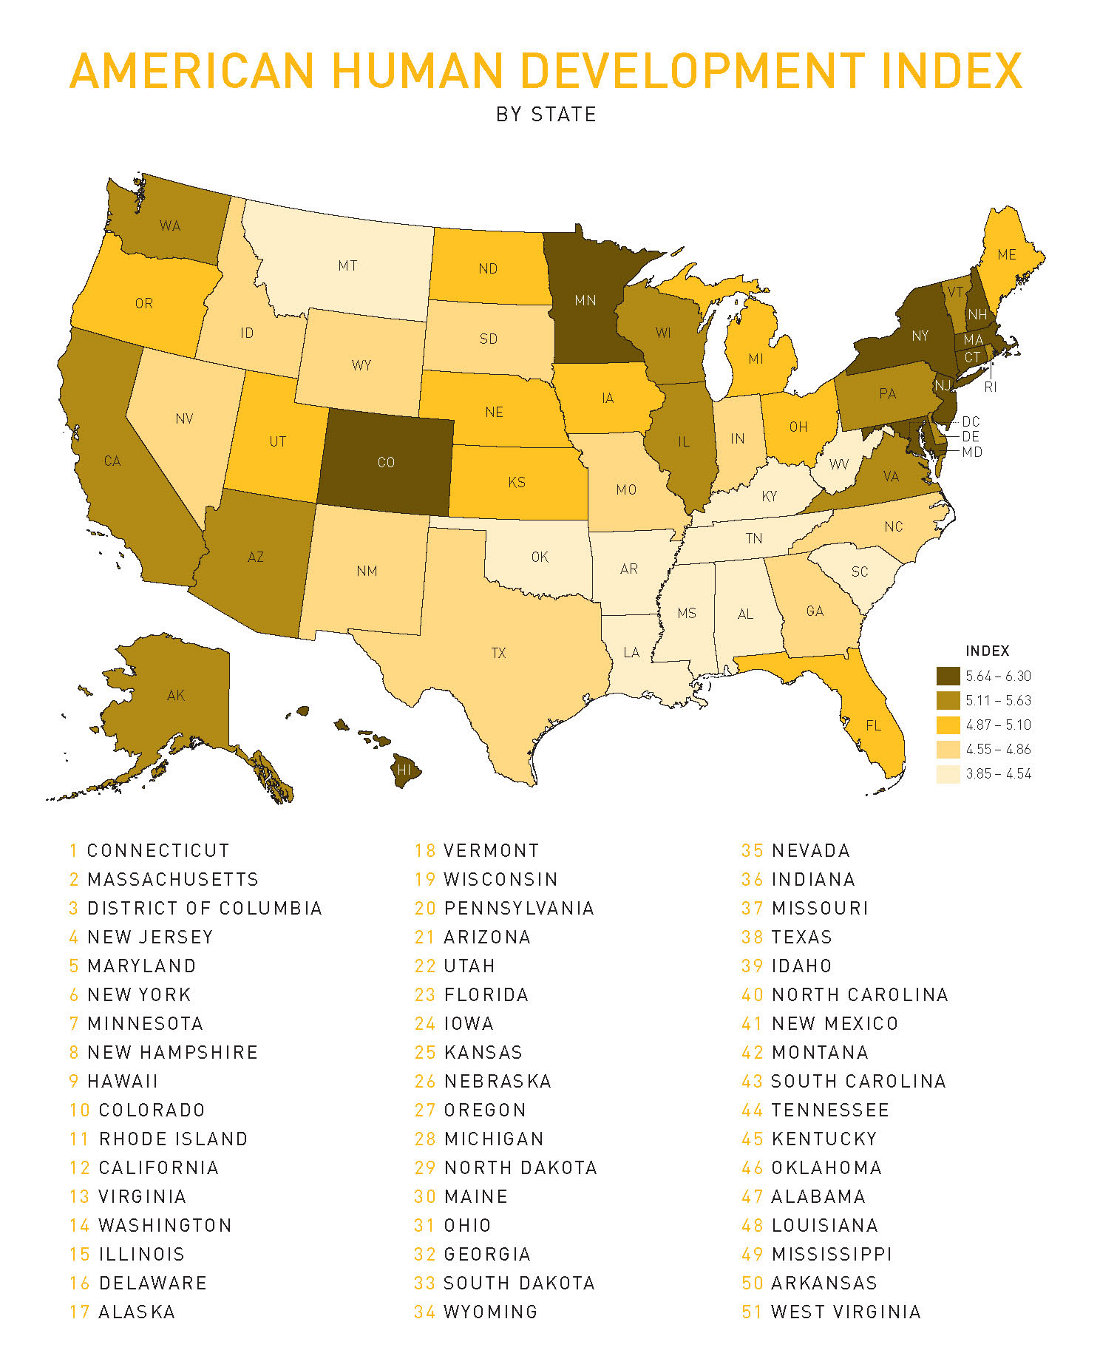 American Human Development Index by State